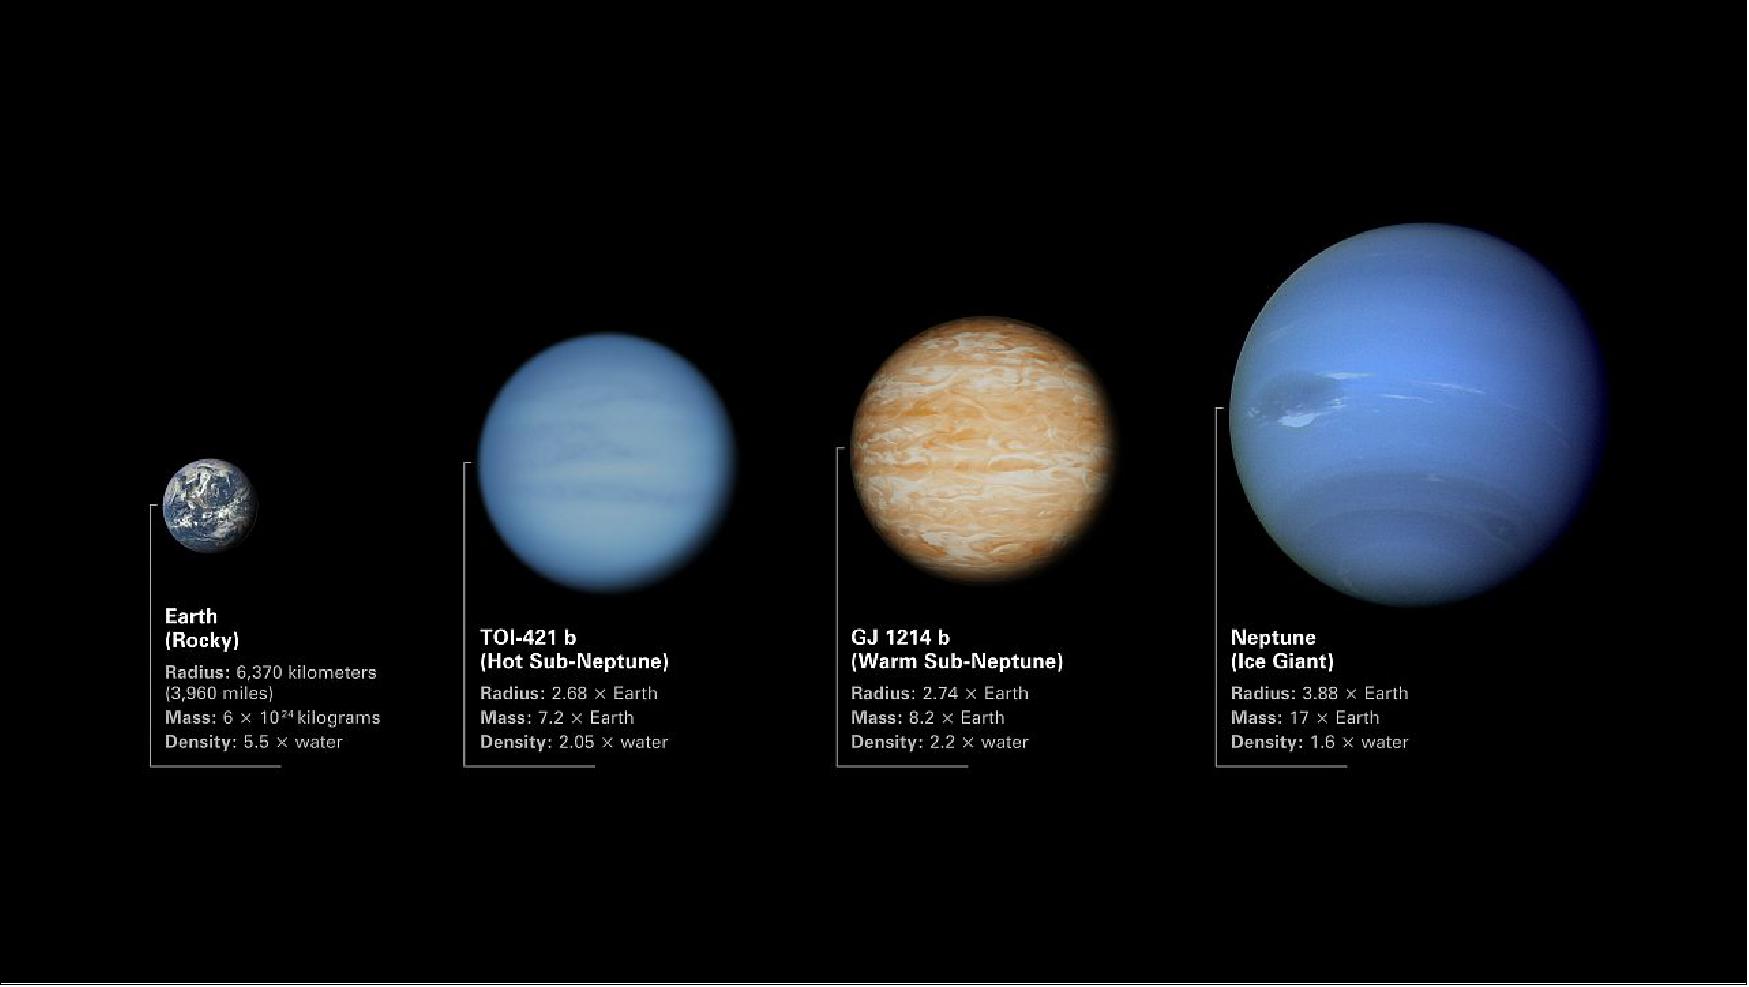 Figure 10: Illustration comparing the sizes of sub-Neptune exoplanets TOI-421 b and GJ 1214 b to Earth and Neptune. Both TOI-421 b and GJ 1214 b are in between Earth and Neptune in terms of radius, mass, and density. The low densities of the two exoplanets indicates that they must have thick atmospheres. The planets are arranged from left to right in order of increasing radius and mass: - Image of Earth from the Deep Space Climate Observatory: Earth is a rocky planet with an average radius of roughly 6,370 kilometers, a mass of about 6 billion trillion metric tons, and a density 5.5 times that of water. - llustration of TOI-421 b: TOI-421 b is a hot sub-Neptune exoplanet with a radius 2.68 times Earth, a mass 7.2 times Earth, and a density 2.05 times water. - Illustration of GJ 1214 b: GJ 1214 b is a warm sub-Neptune exoplanet with a radius 2.74 times Earth, a mass 8.2 times Earth, and a density 2.2 times water. - Image of Neptune from Voyager 2: Neptune is an ice giant with a radius 3.88 times that of Earth (giving it a volume nearly 58 times Earth), a mass 17 times Earth, and a density of only 1.6 times water. The illustration shows the planets to scale in terms of radius, but not location in space or distance from their stars. While Earth and Neptune orbit the Sun, TOI-421 b orbits a sun-like star roughly 244 light-years away, and GJ 1214 b orbits a small red dwarf star about 48 light-years away. [credits: illustration: NASA, ESA, CSA, Dani Player (STScI)]